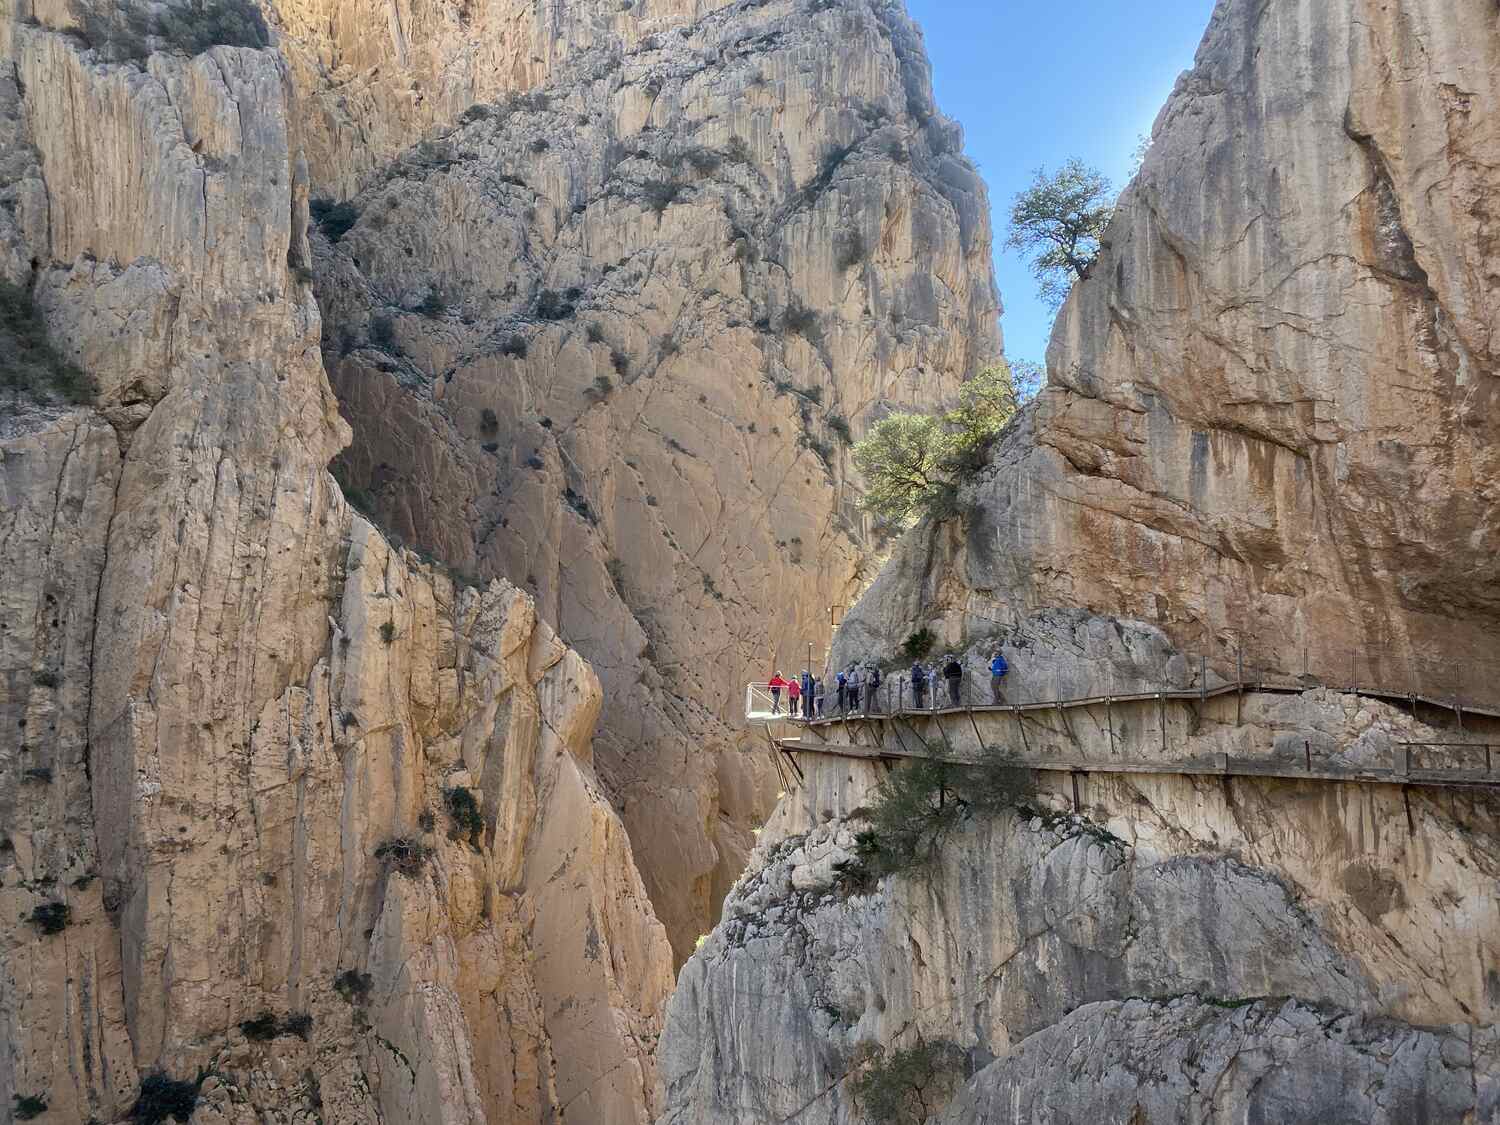 Recommendations for the Caminito del Rey in autumn and winter